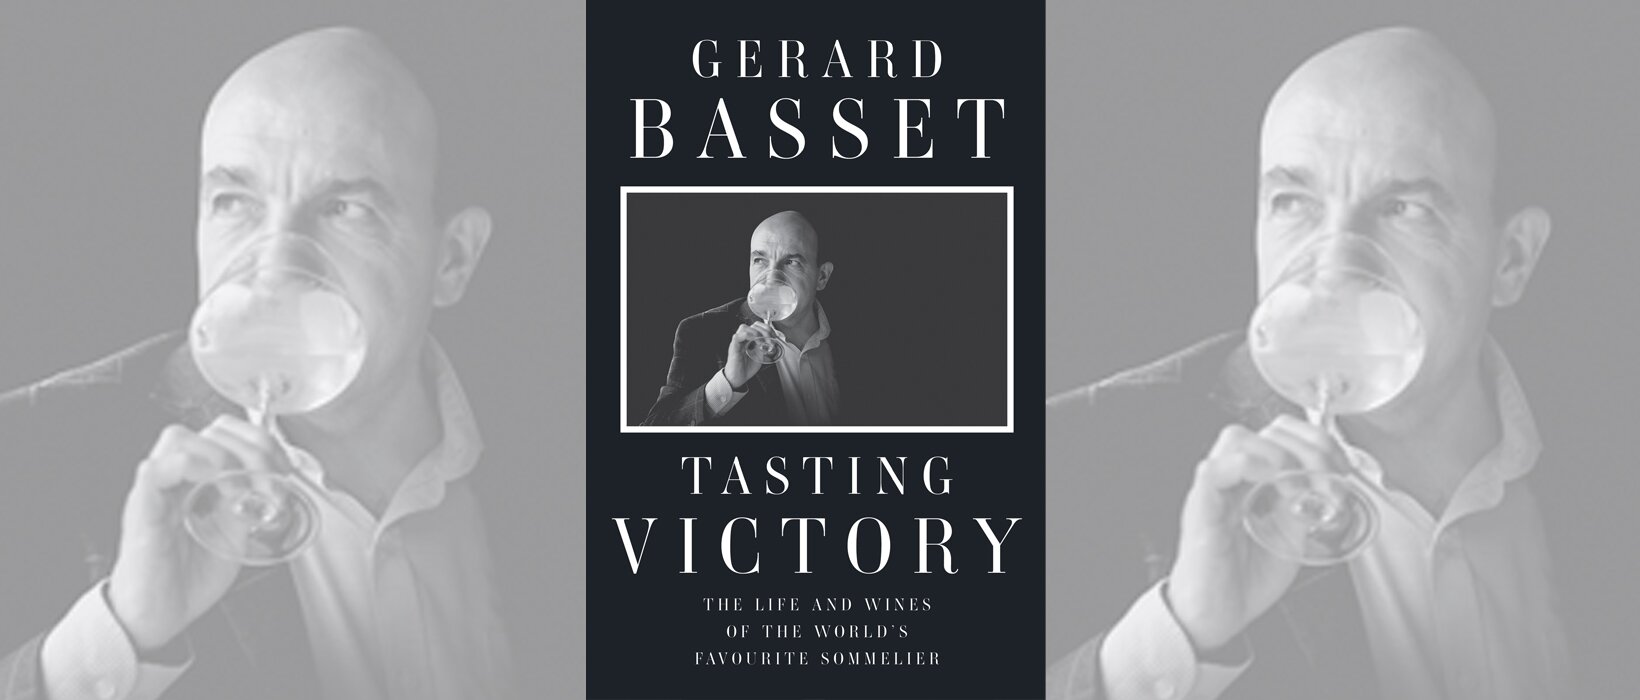 Book review: Tasting Victory by Gerard Basset